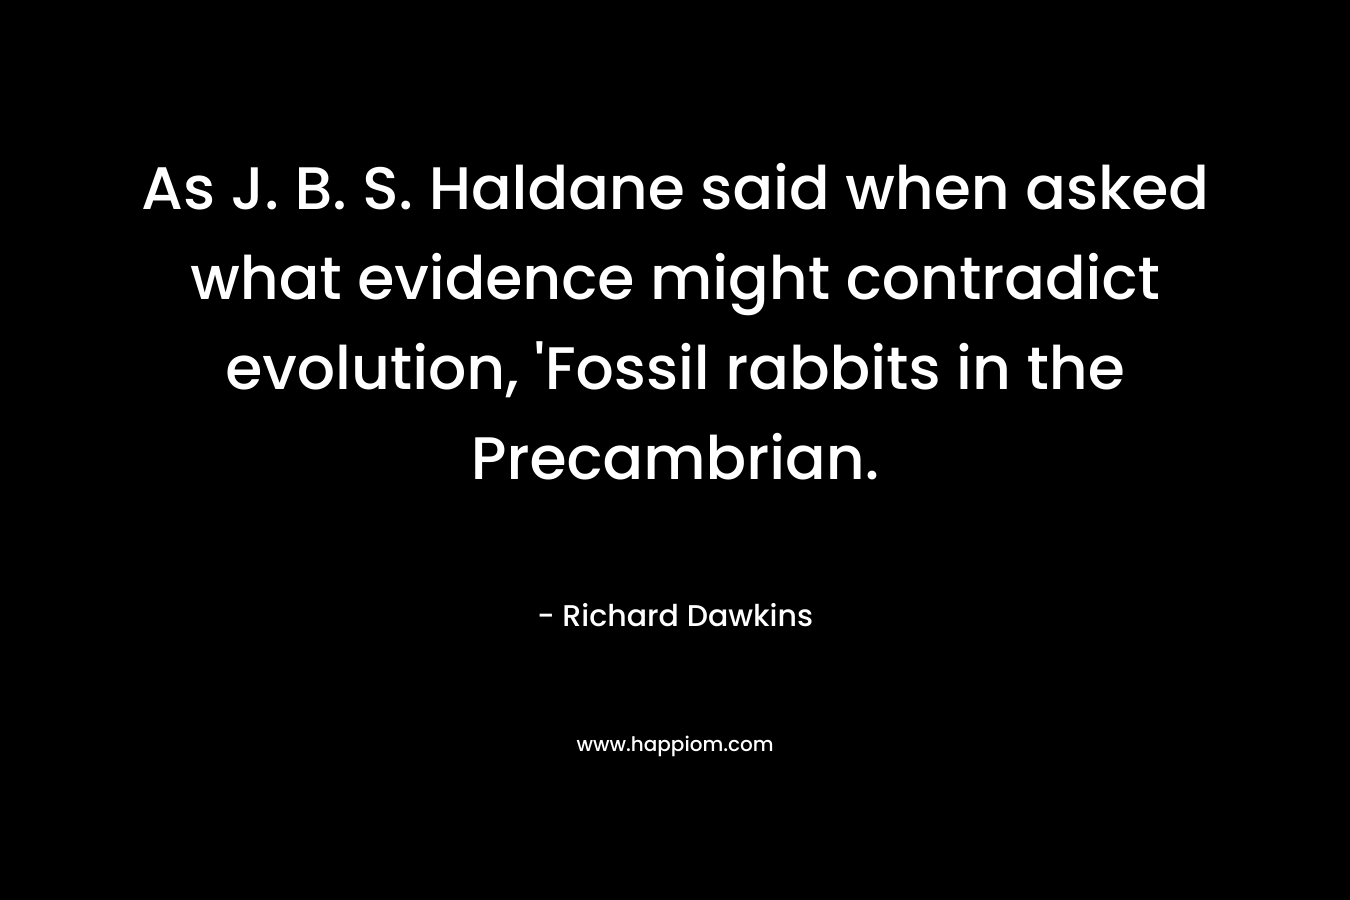 As J. B. S. Haldane said when asked what evidence might contradict evolution, ‘Fossil rabbits in the Precambrian. – Richard Dawkins